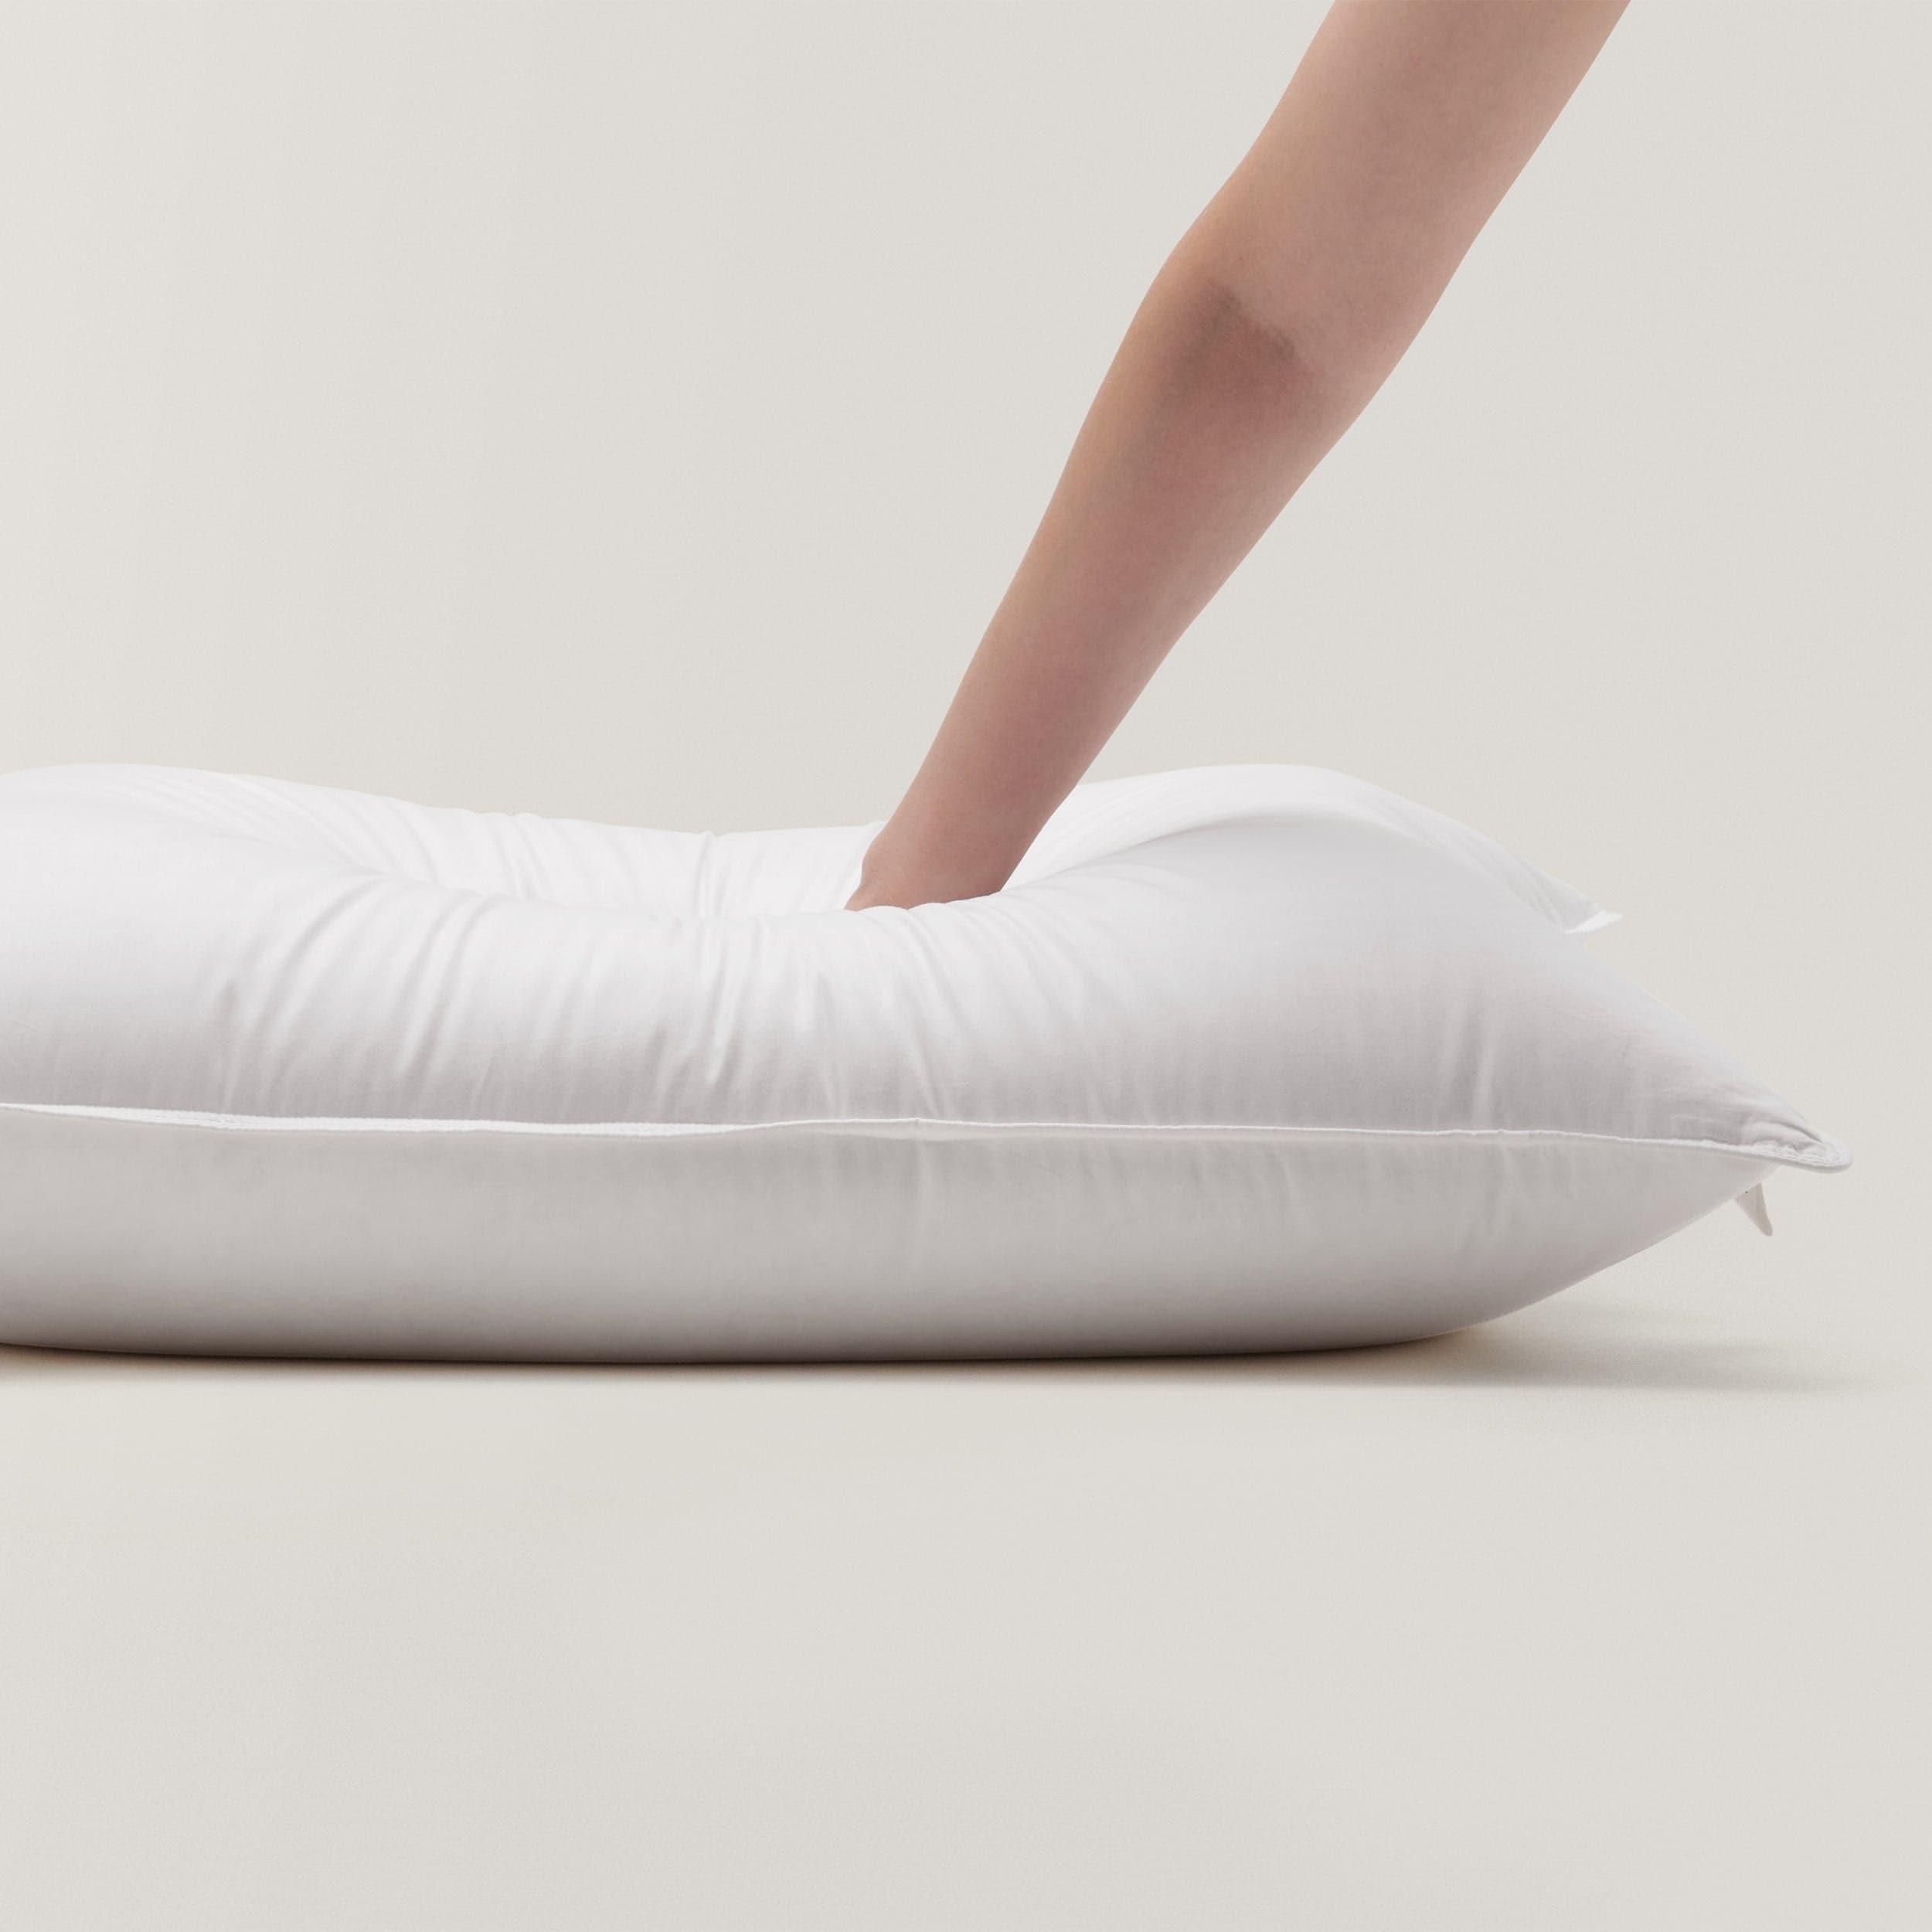 The softness of the down pillow makes it the perfect companion for a cozy afternoon nap.